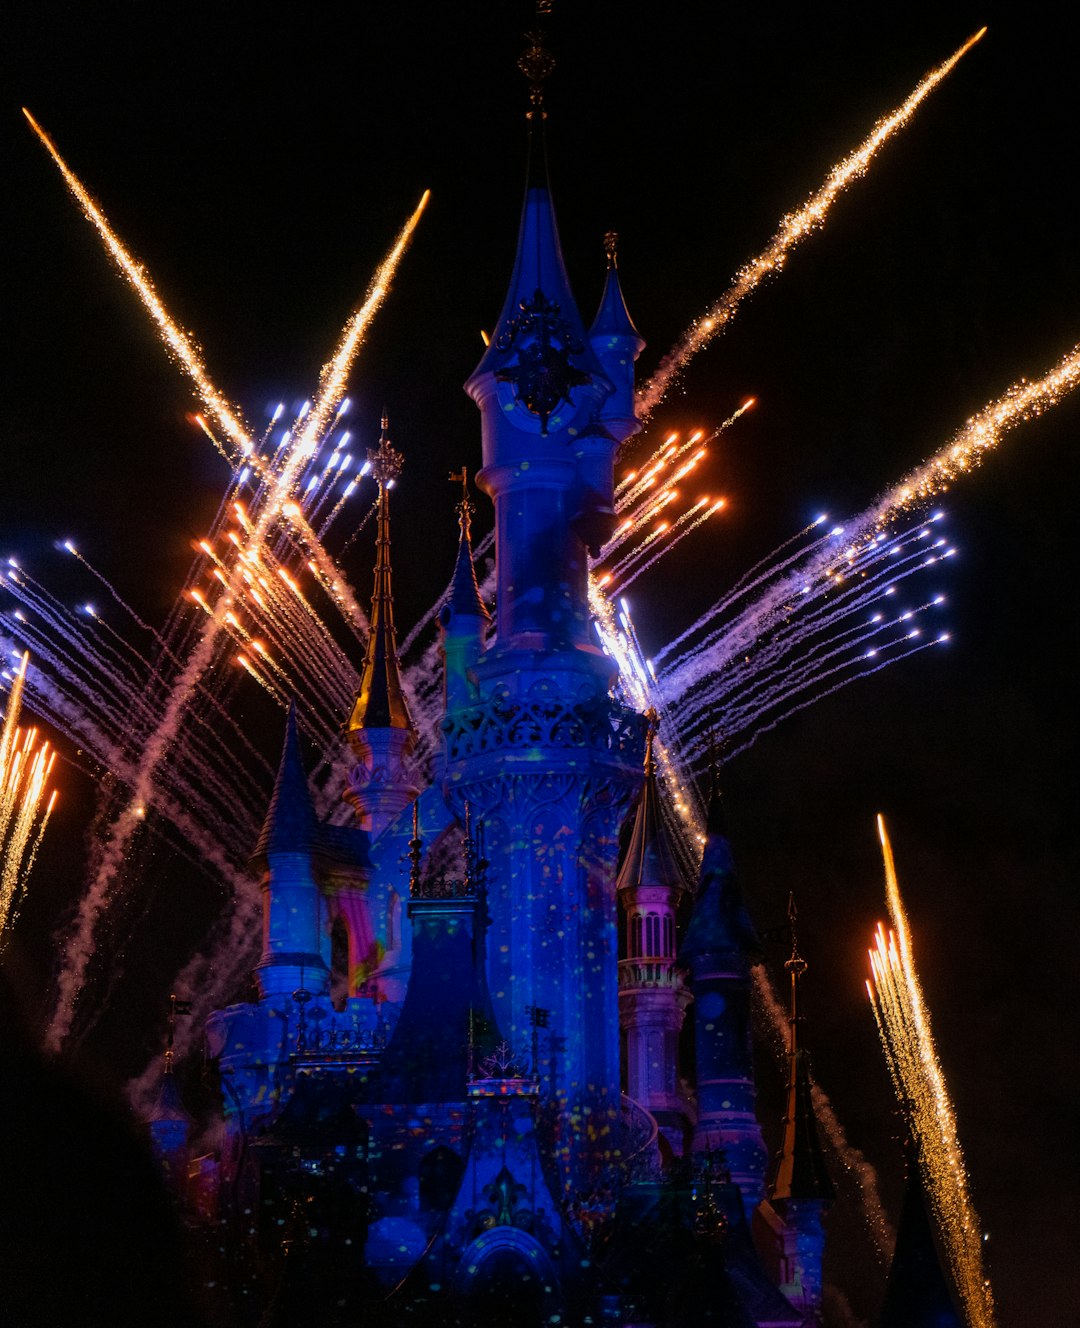 time-lapse photography of fireworks shooting above Disneyland castle